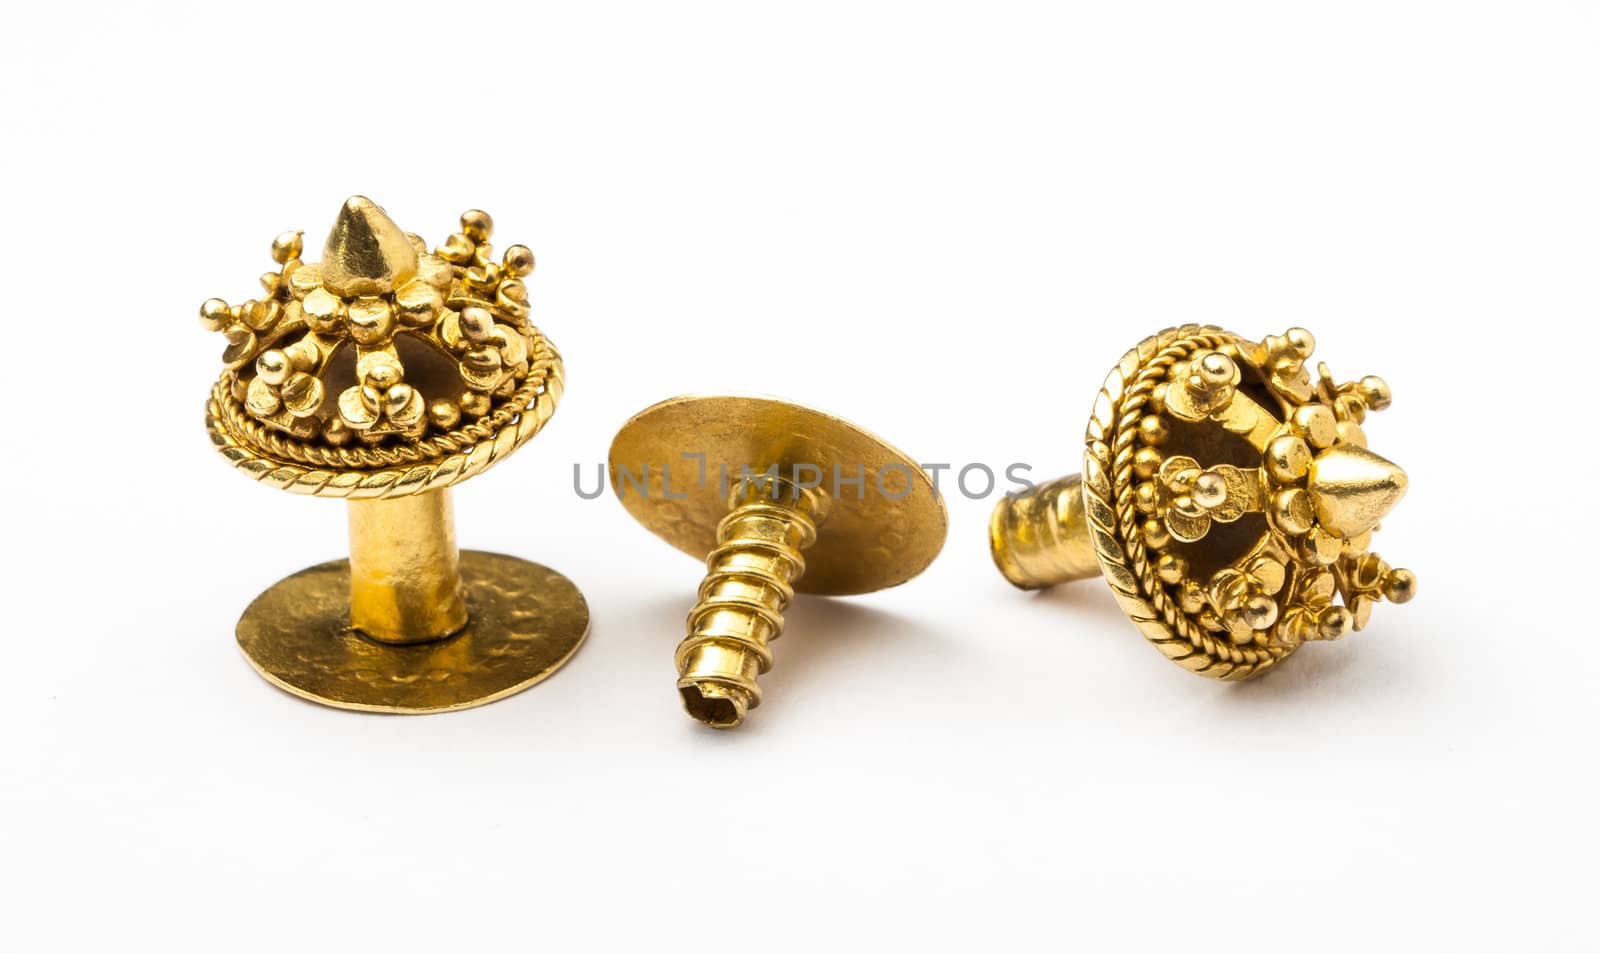 These antique golden earrings in Lanna-Burmese style are over 120 years. It is the value heritage from ancestor to new generation of Lanna (Nothern Thai) family. These earrings are very rare to see in the recent. The technical and design of this ornament is very unique.